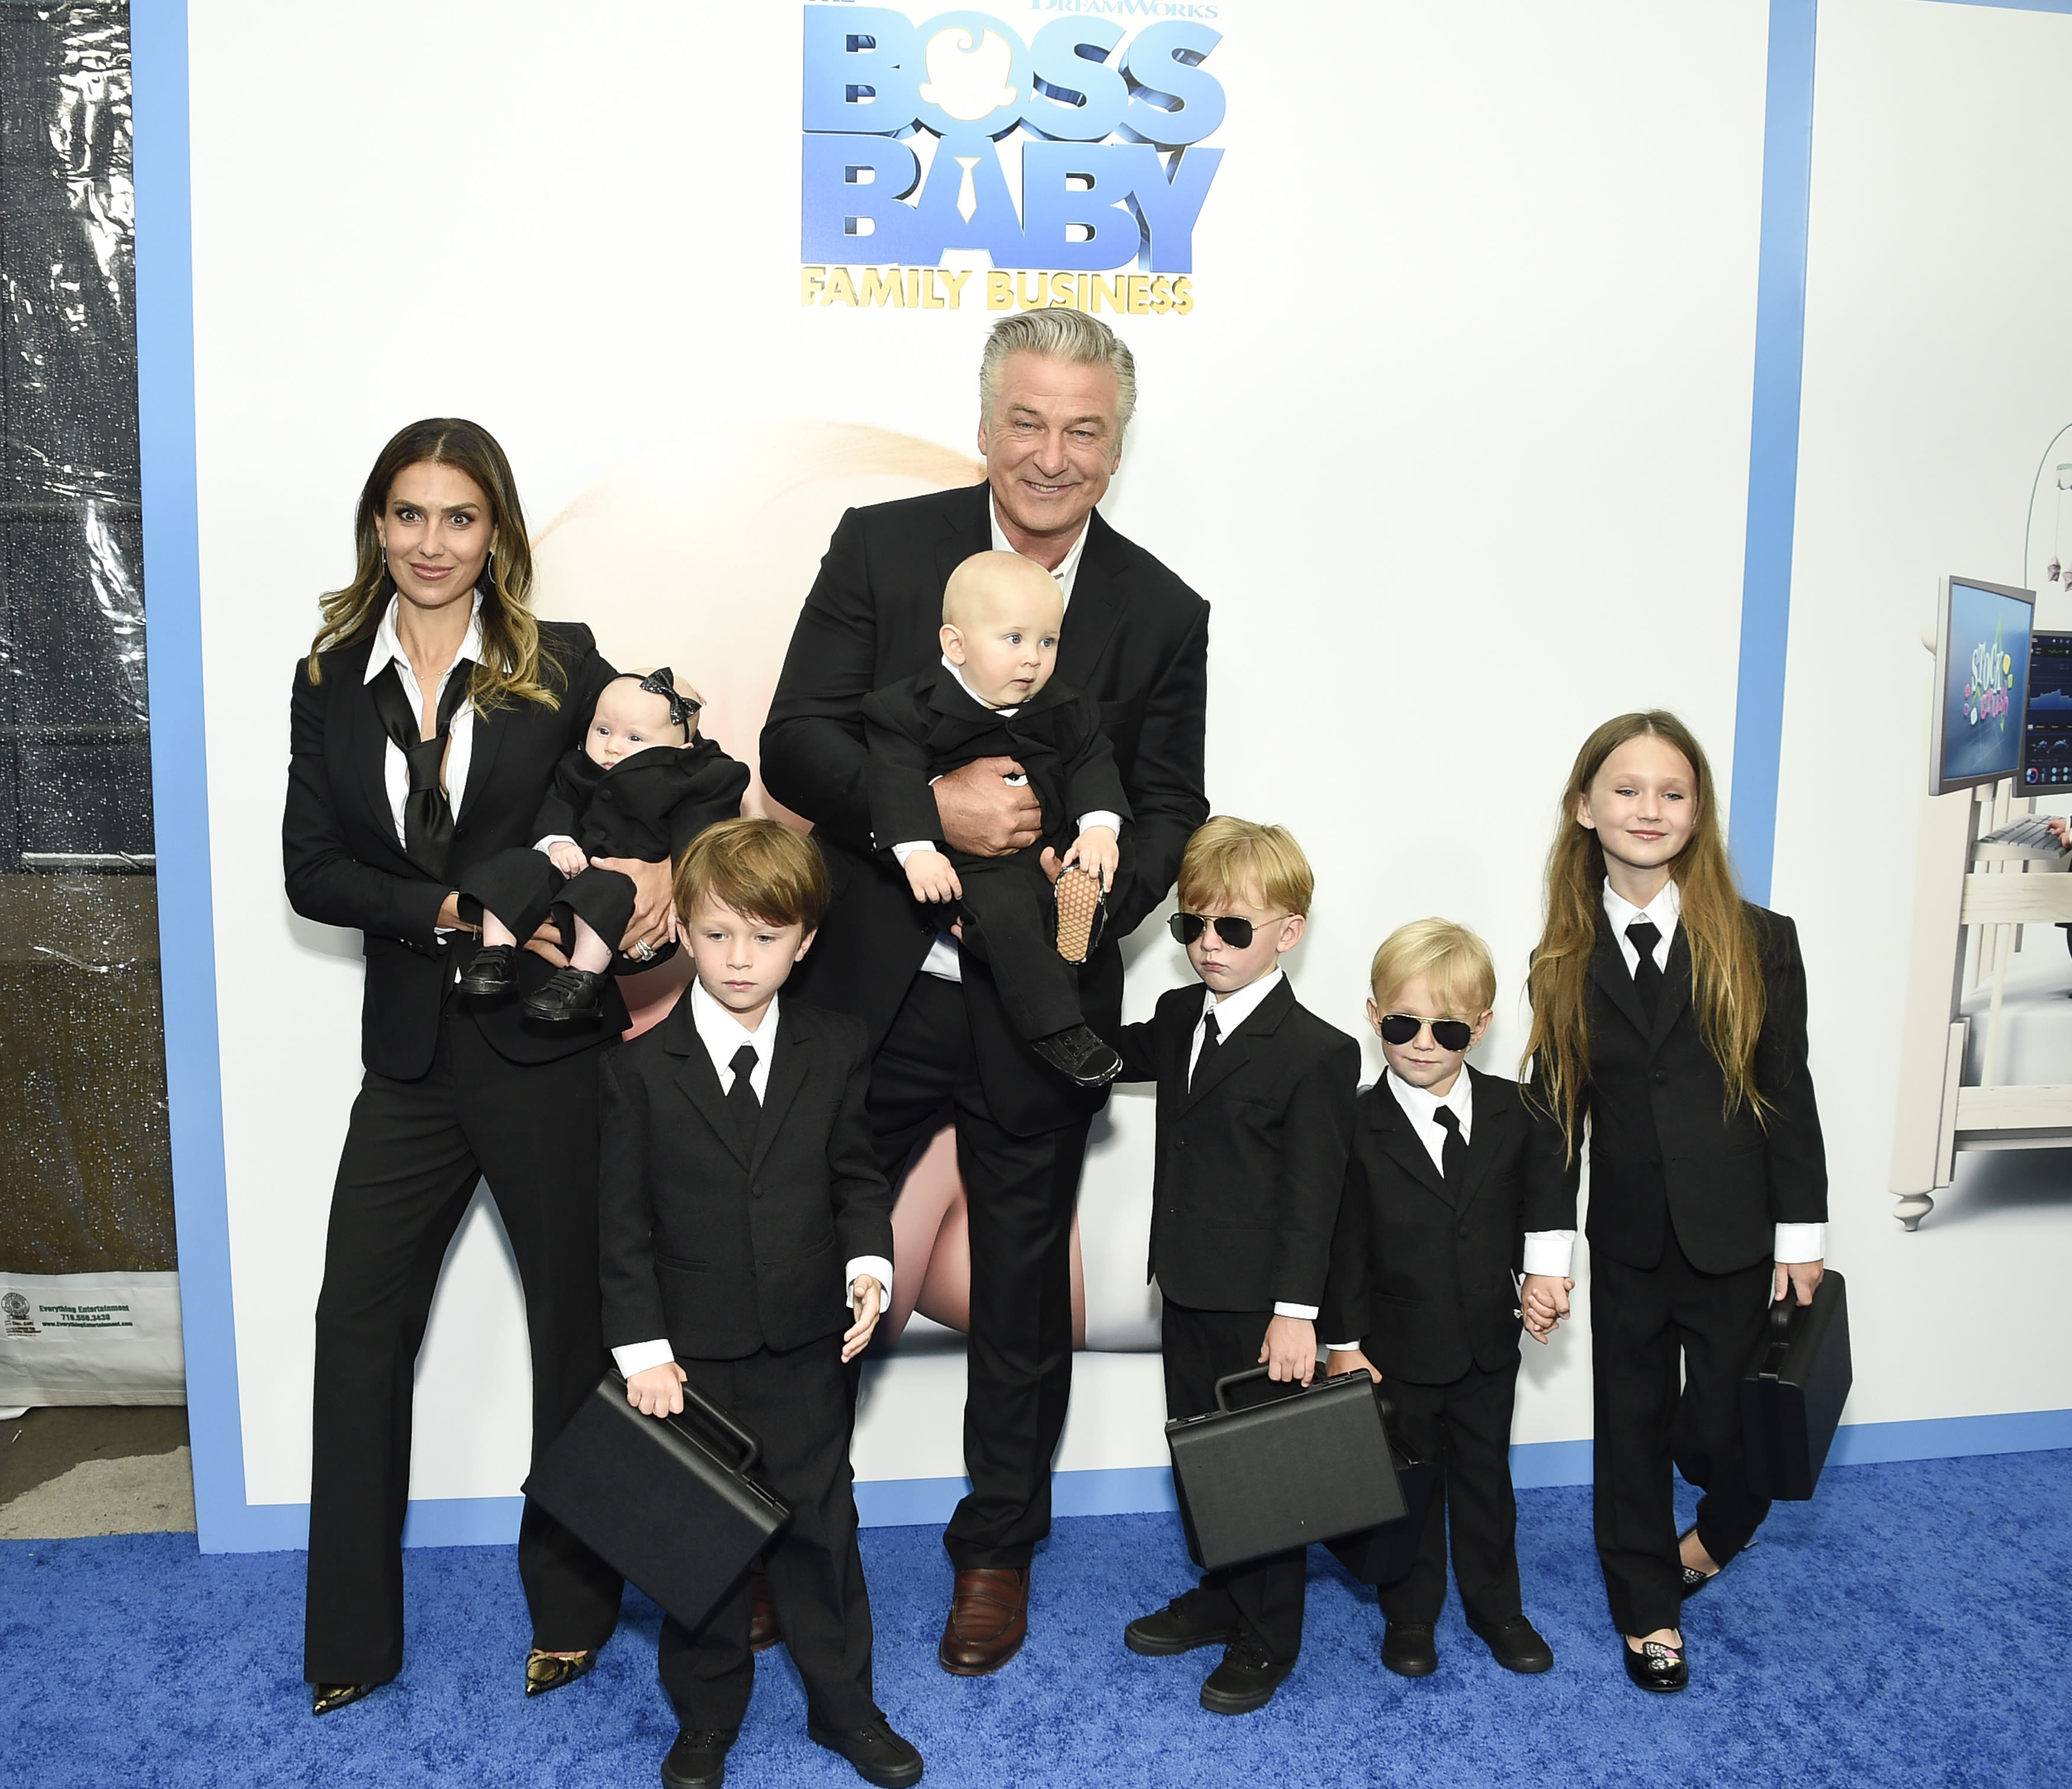 Alec and Hilaria Baldwin (and their 7 kids) to star in TLC reality show 'The Baldwins'